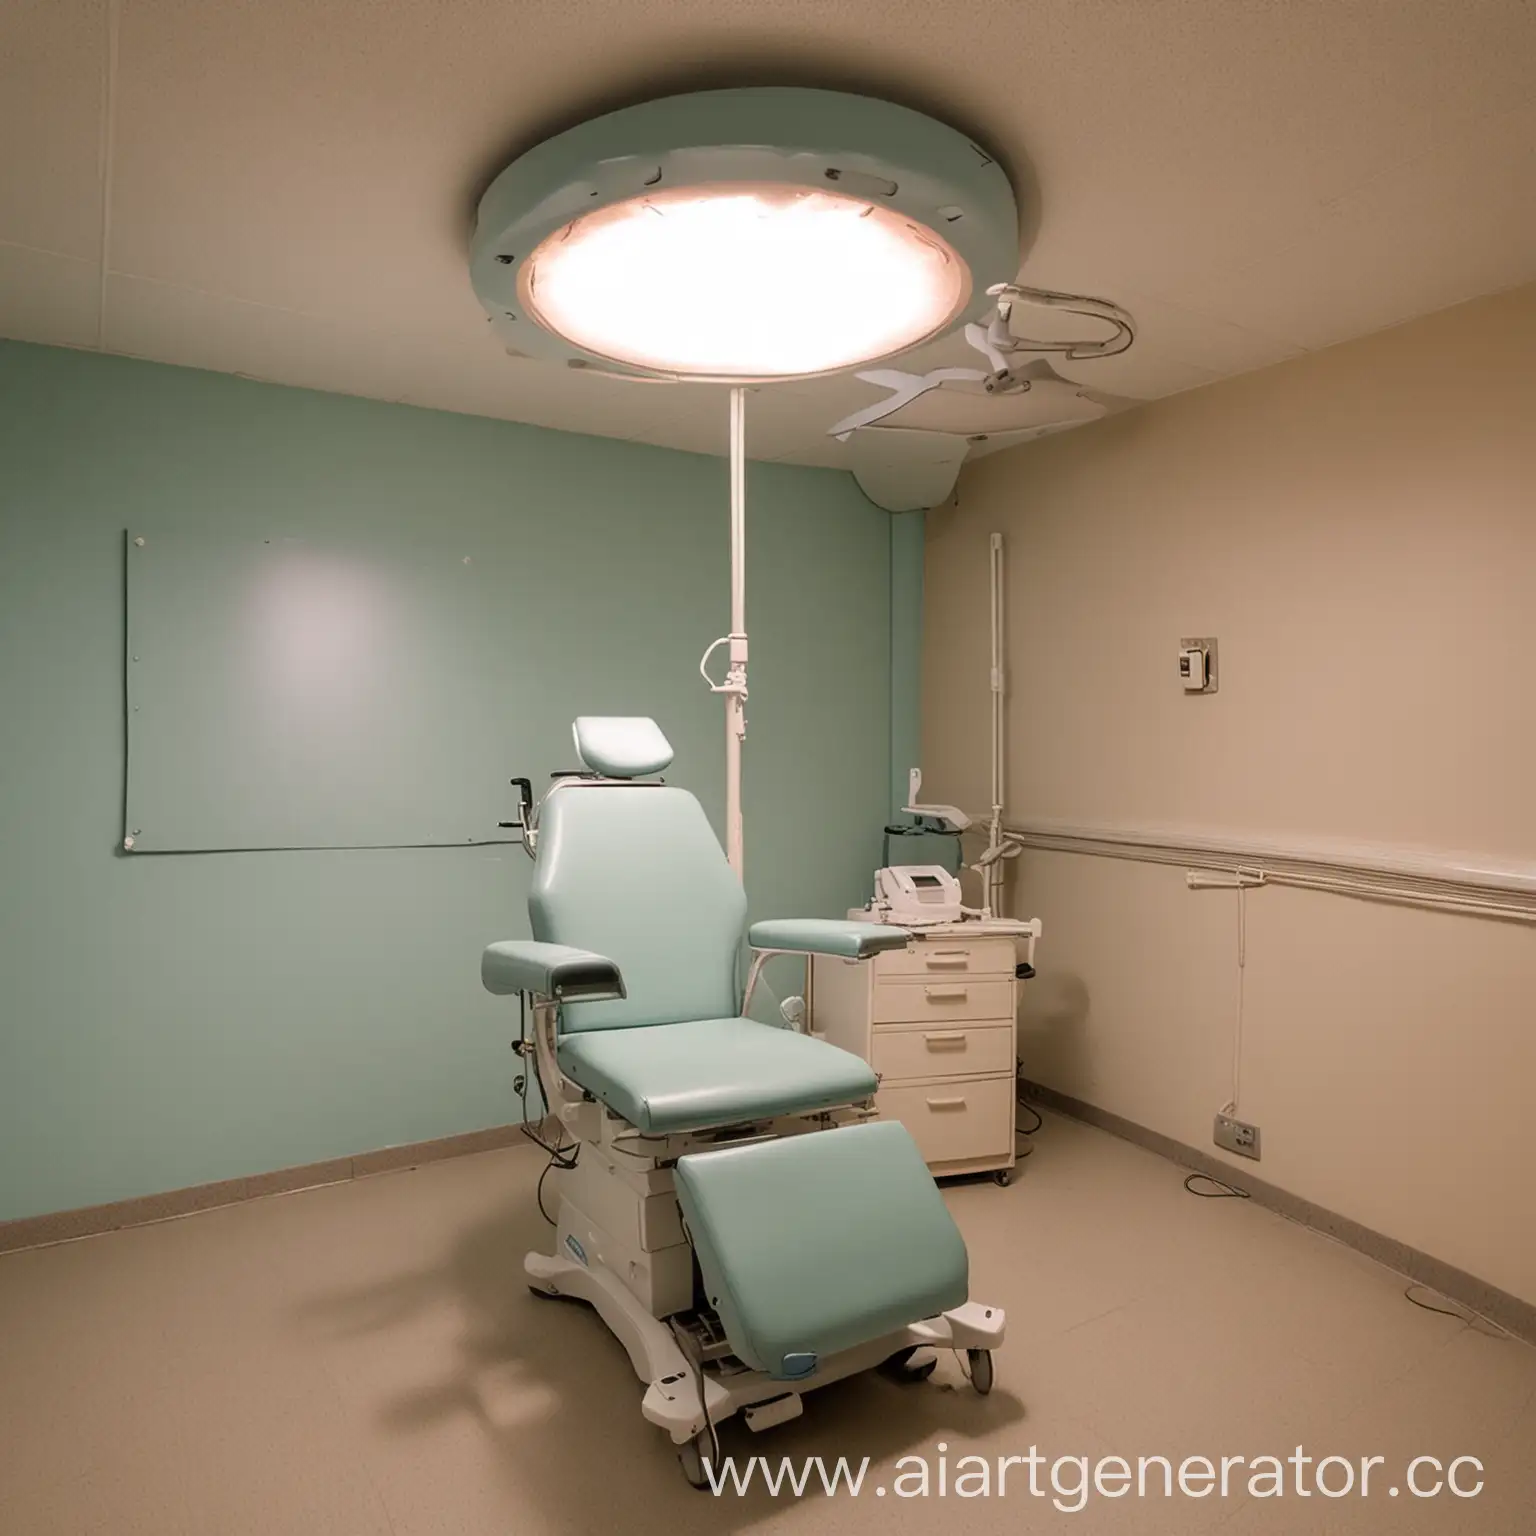 The psychological clinic has a gynecological chair with leg supplies in the middle and a lamp on the ceiling